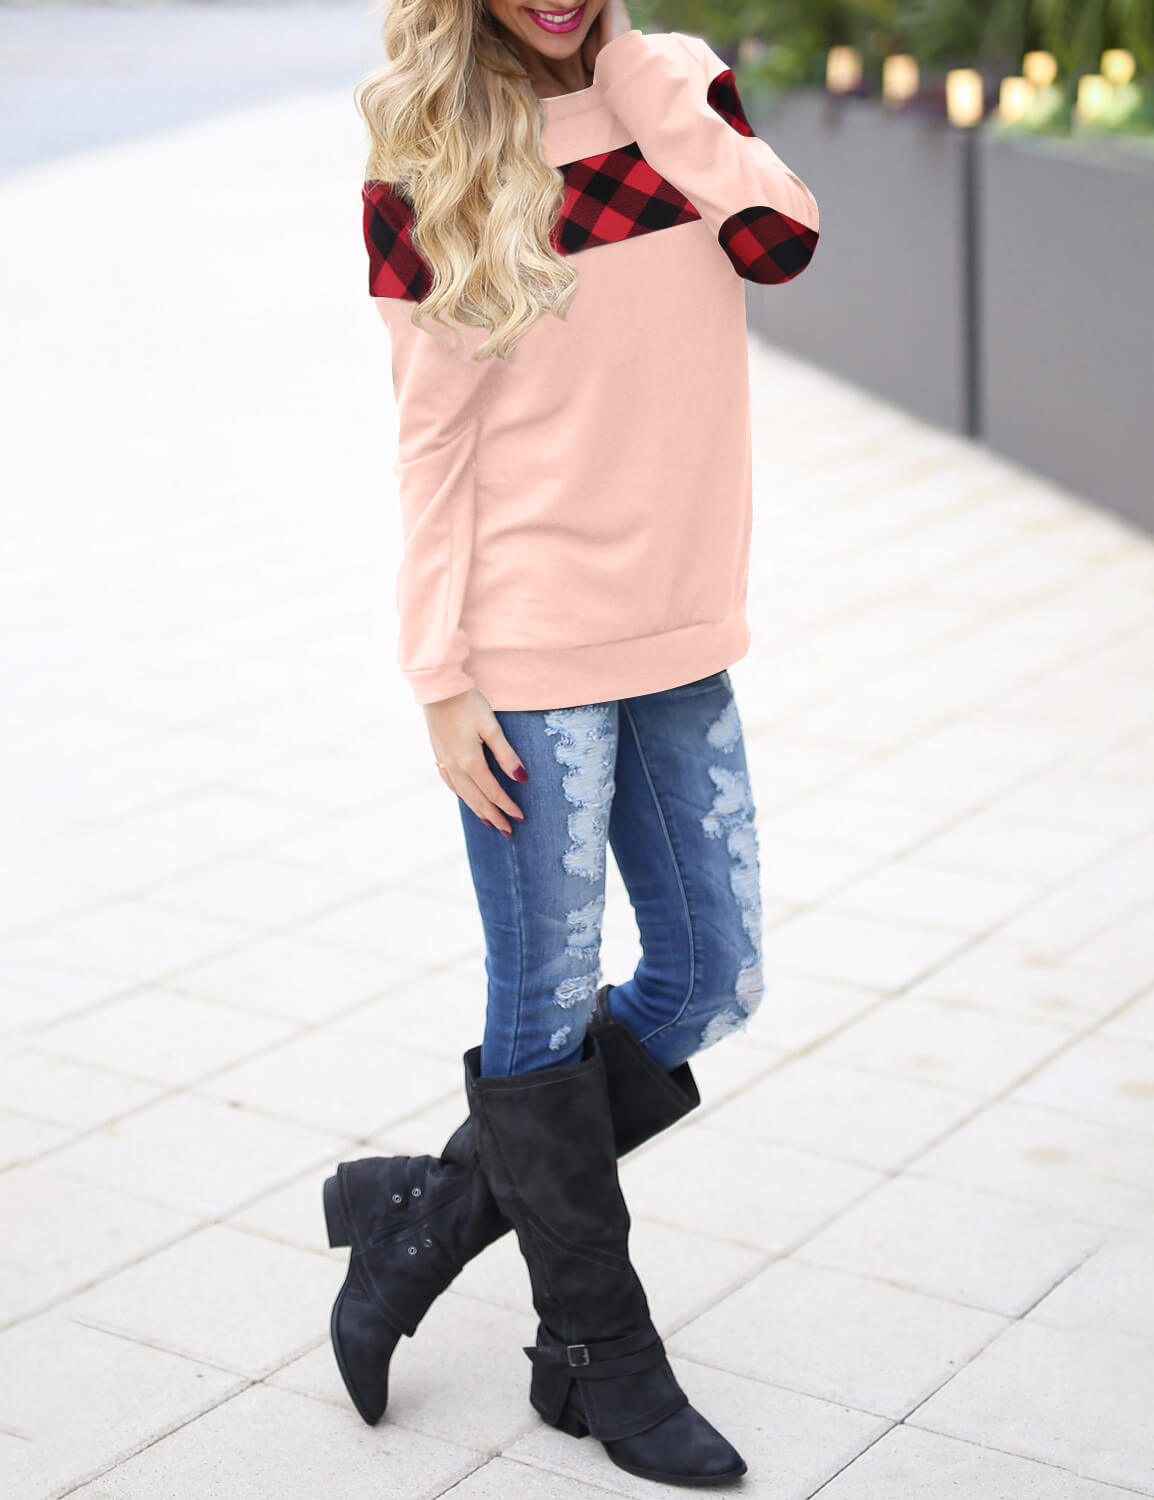 Checked Plaid Elbow Patched Sweatshirt